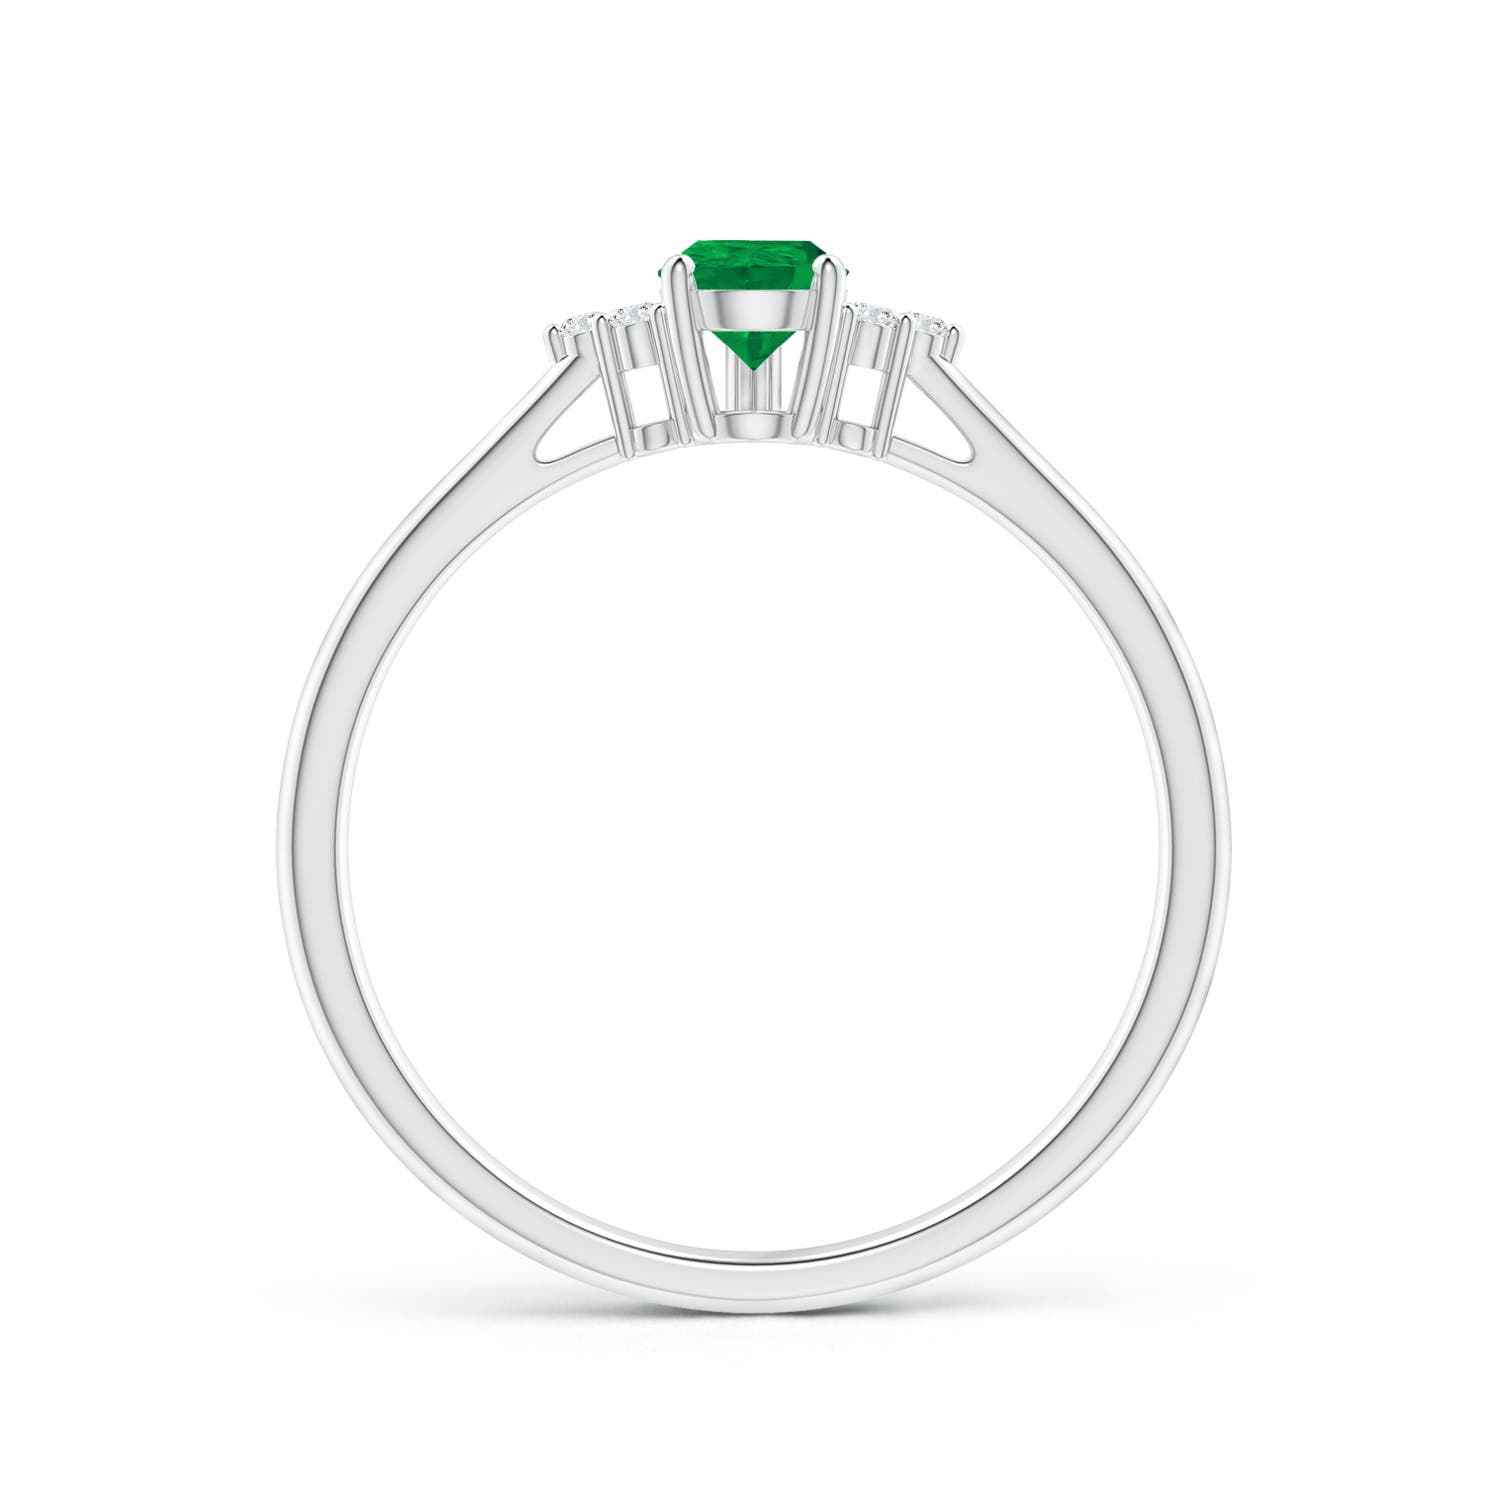 AA - Emerald / 0.4 CT / 14 KT White Gold